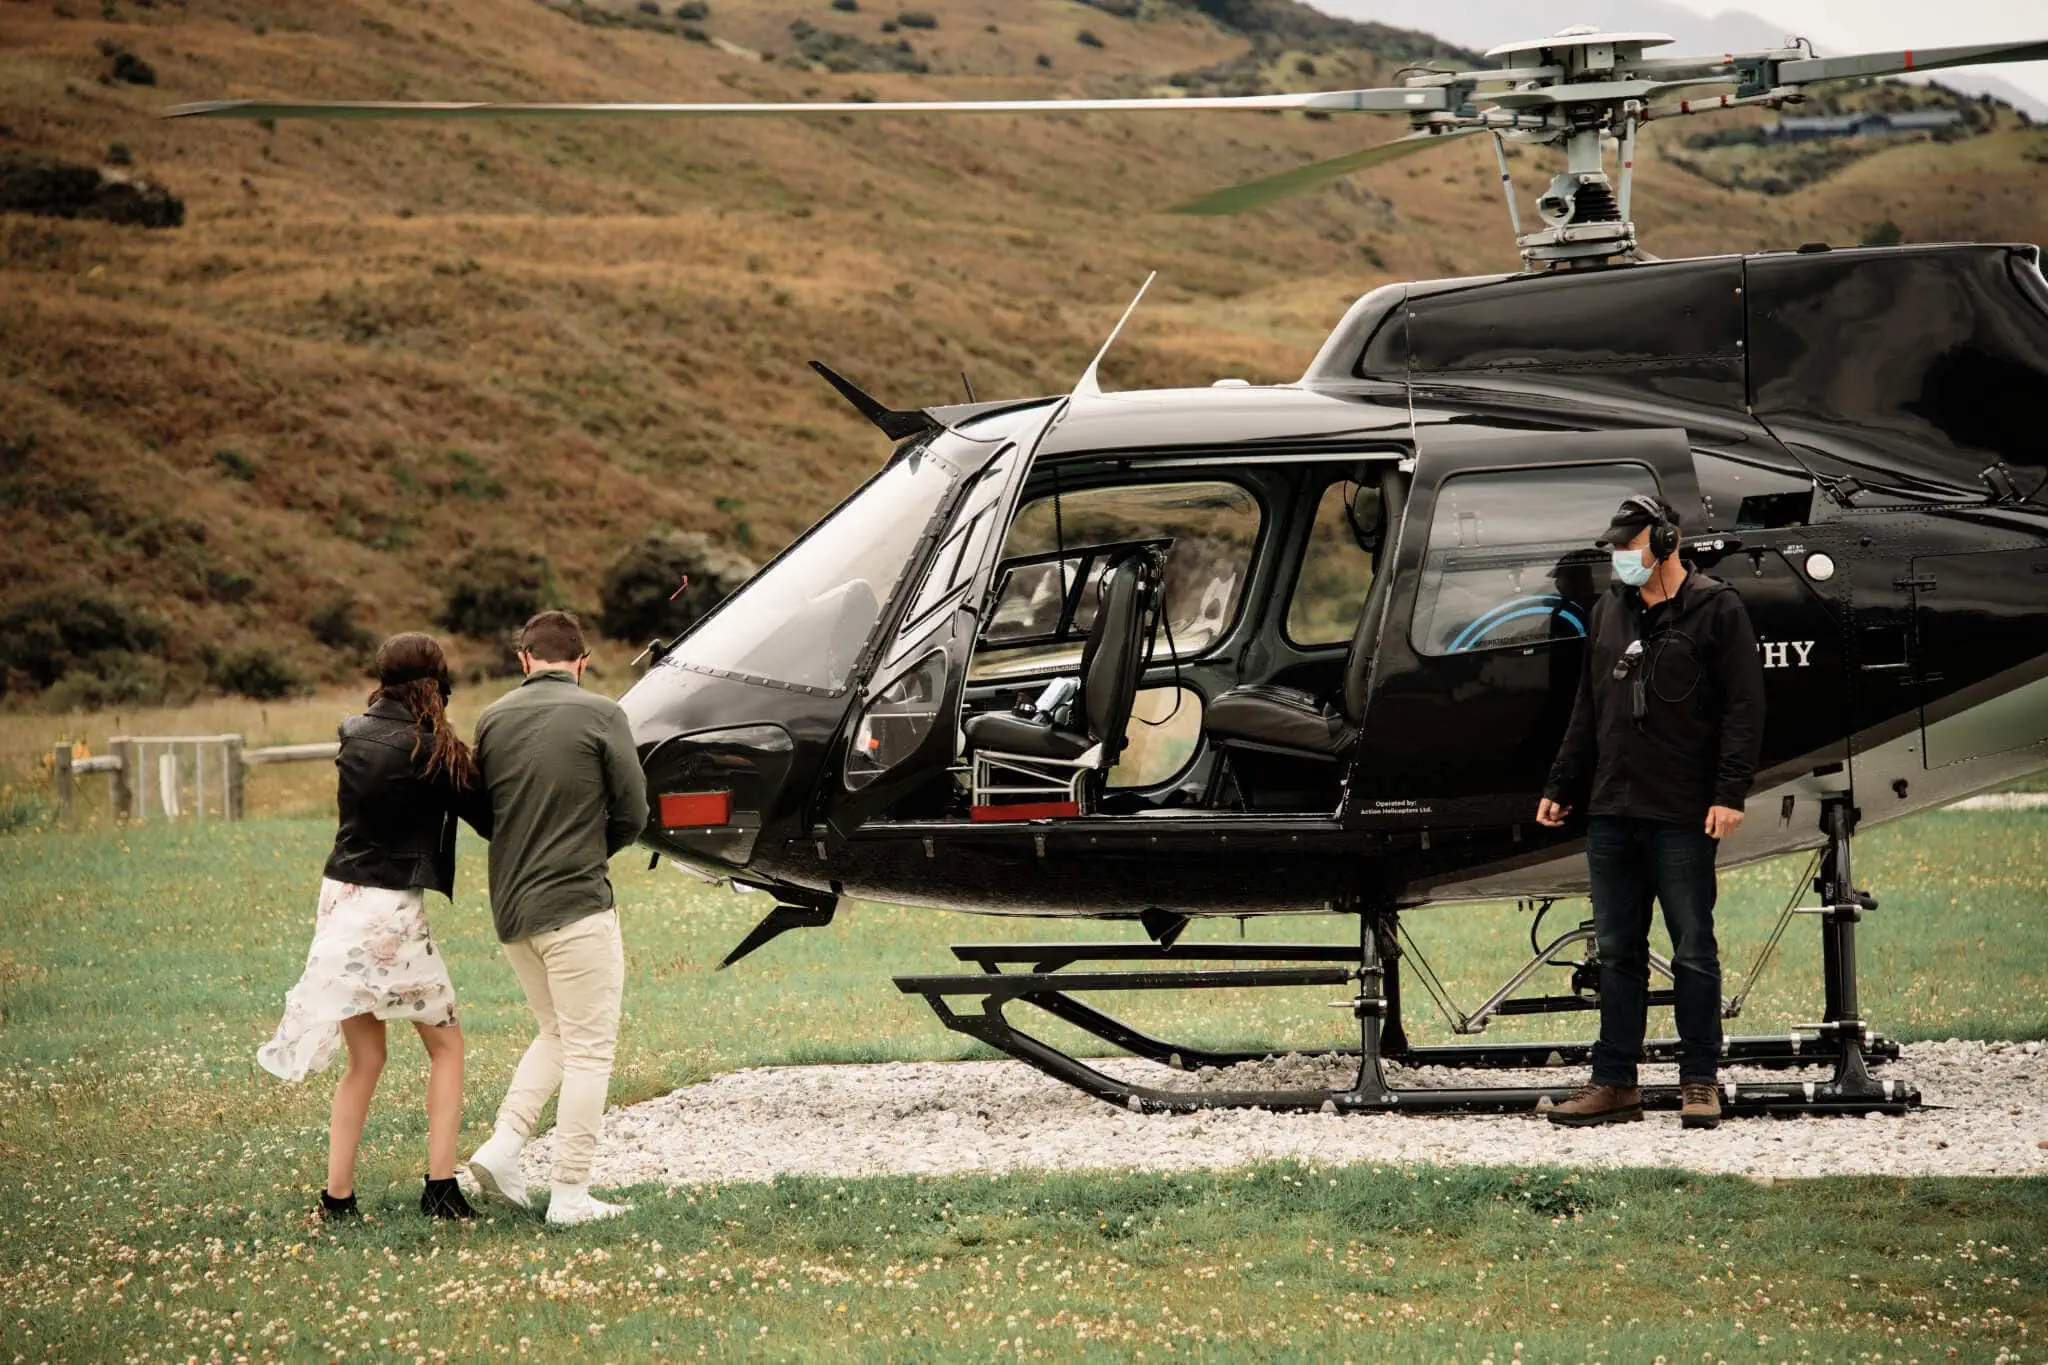 Scott and Hayley standing next to a black helicopter.